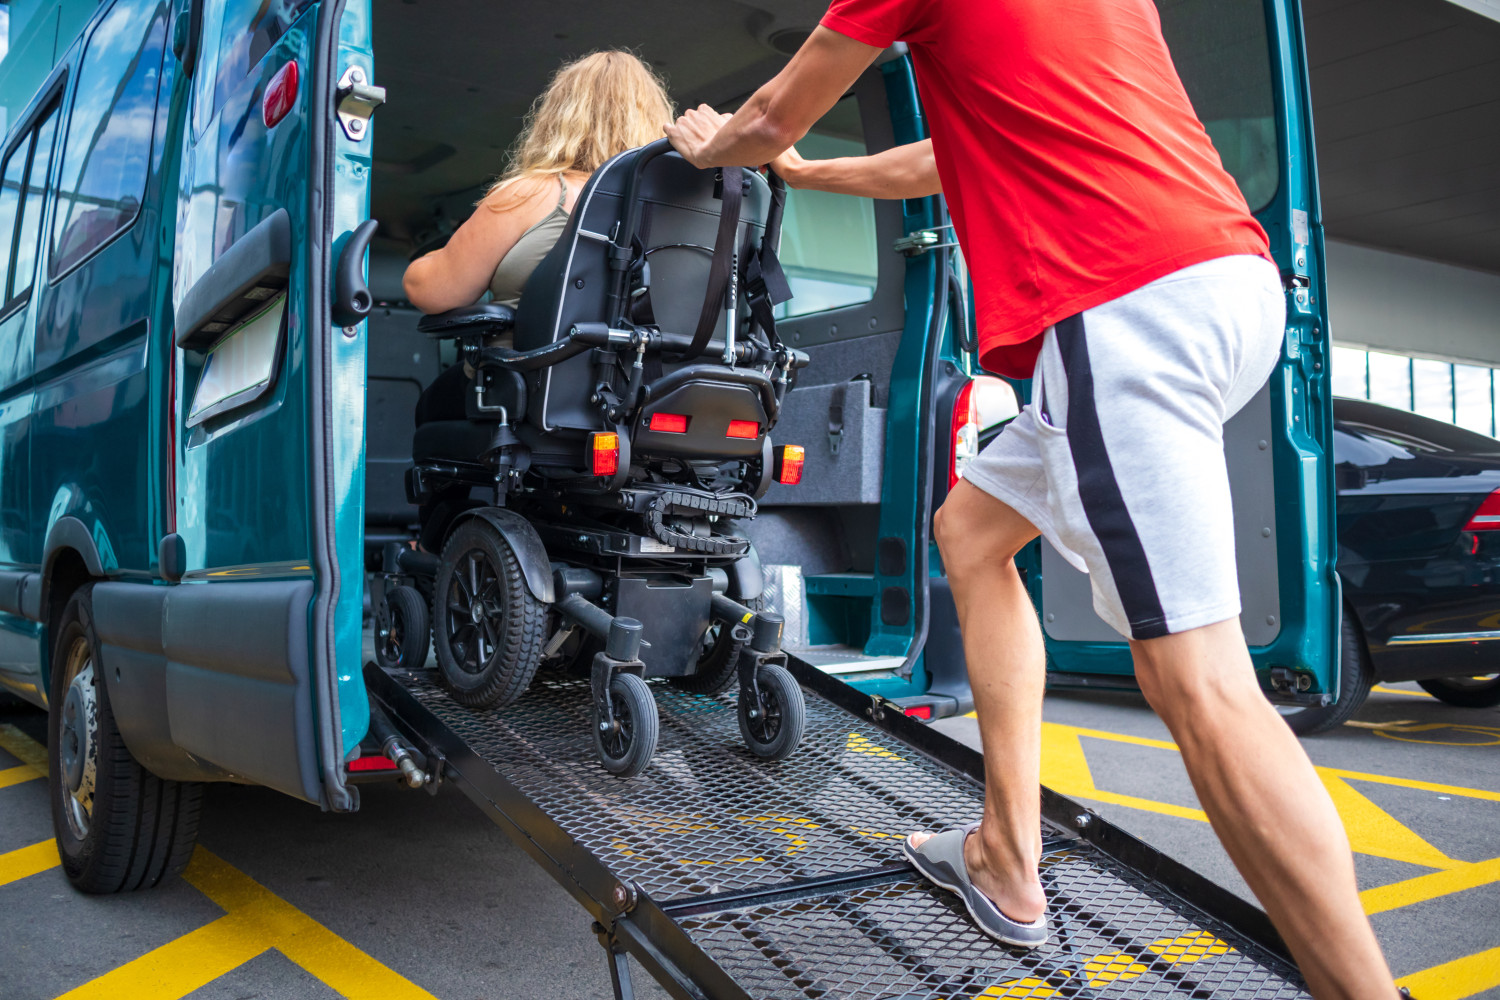 An man is assisting a person in a motorised wheelchair, who is boarding a blue accessible transport vehicle via a deployed ramp.